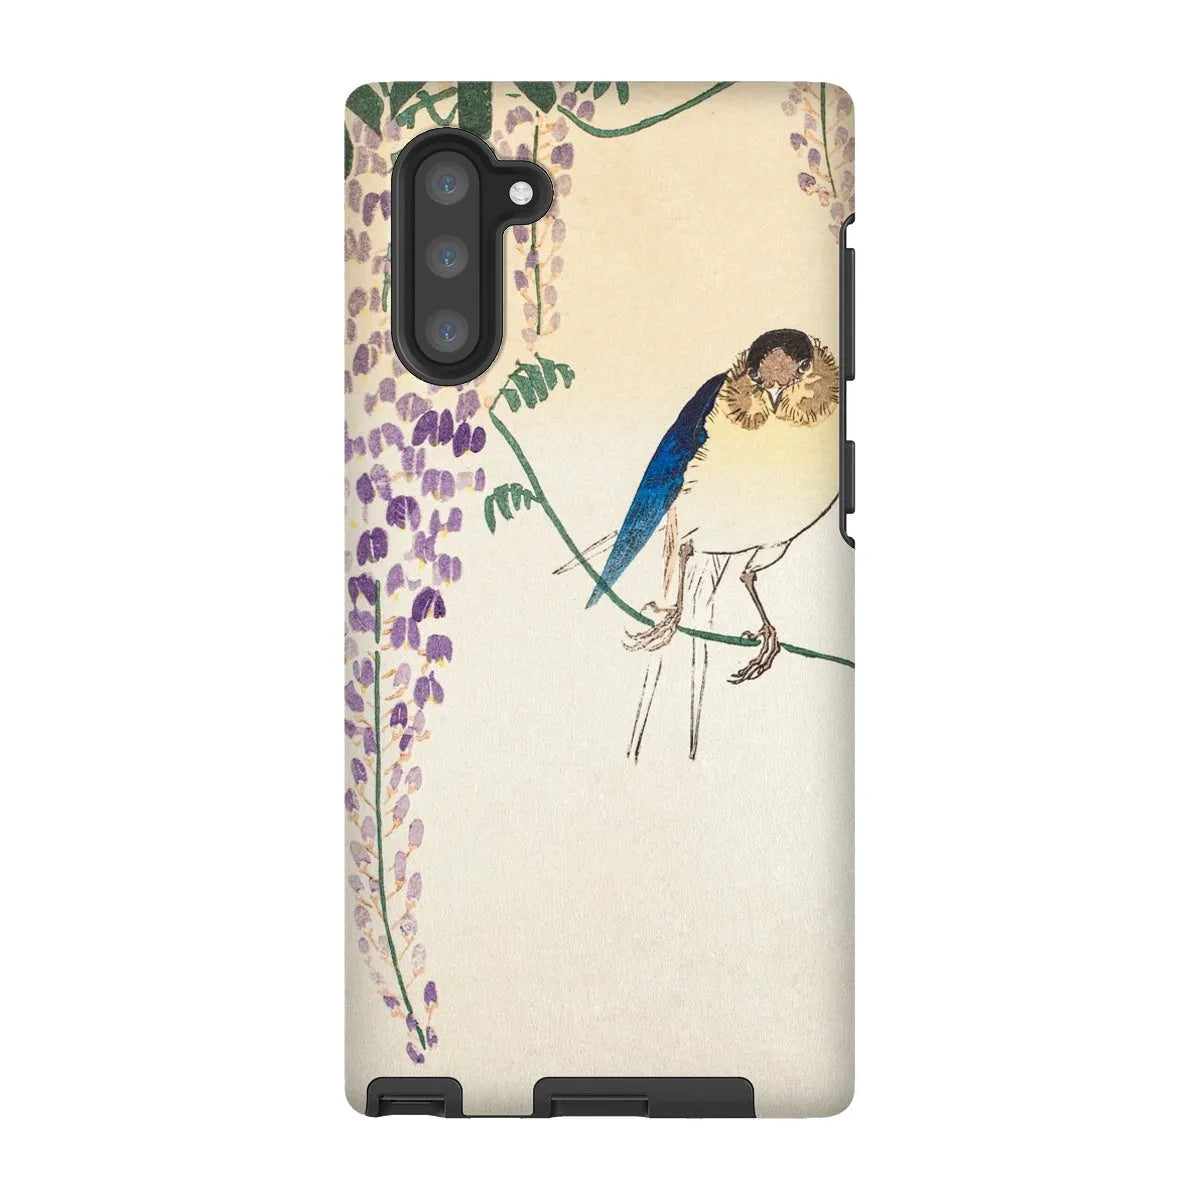 Wisteria And Swallow - Japanese Art Phone Case - Ohara Koson - Samsung Galaxy Note 10 / Matte - Mobile Phone Cases